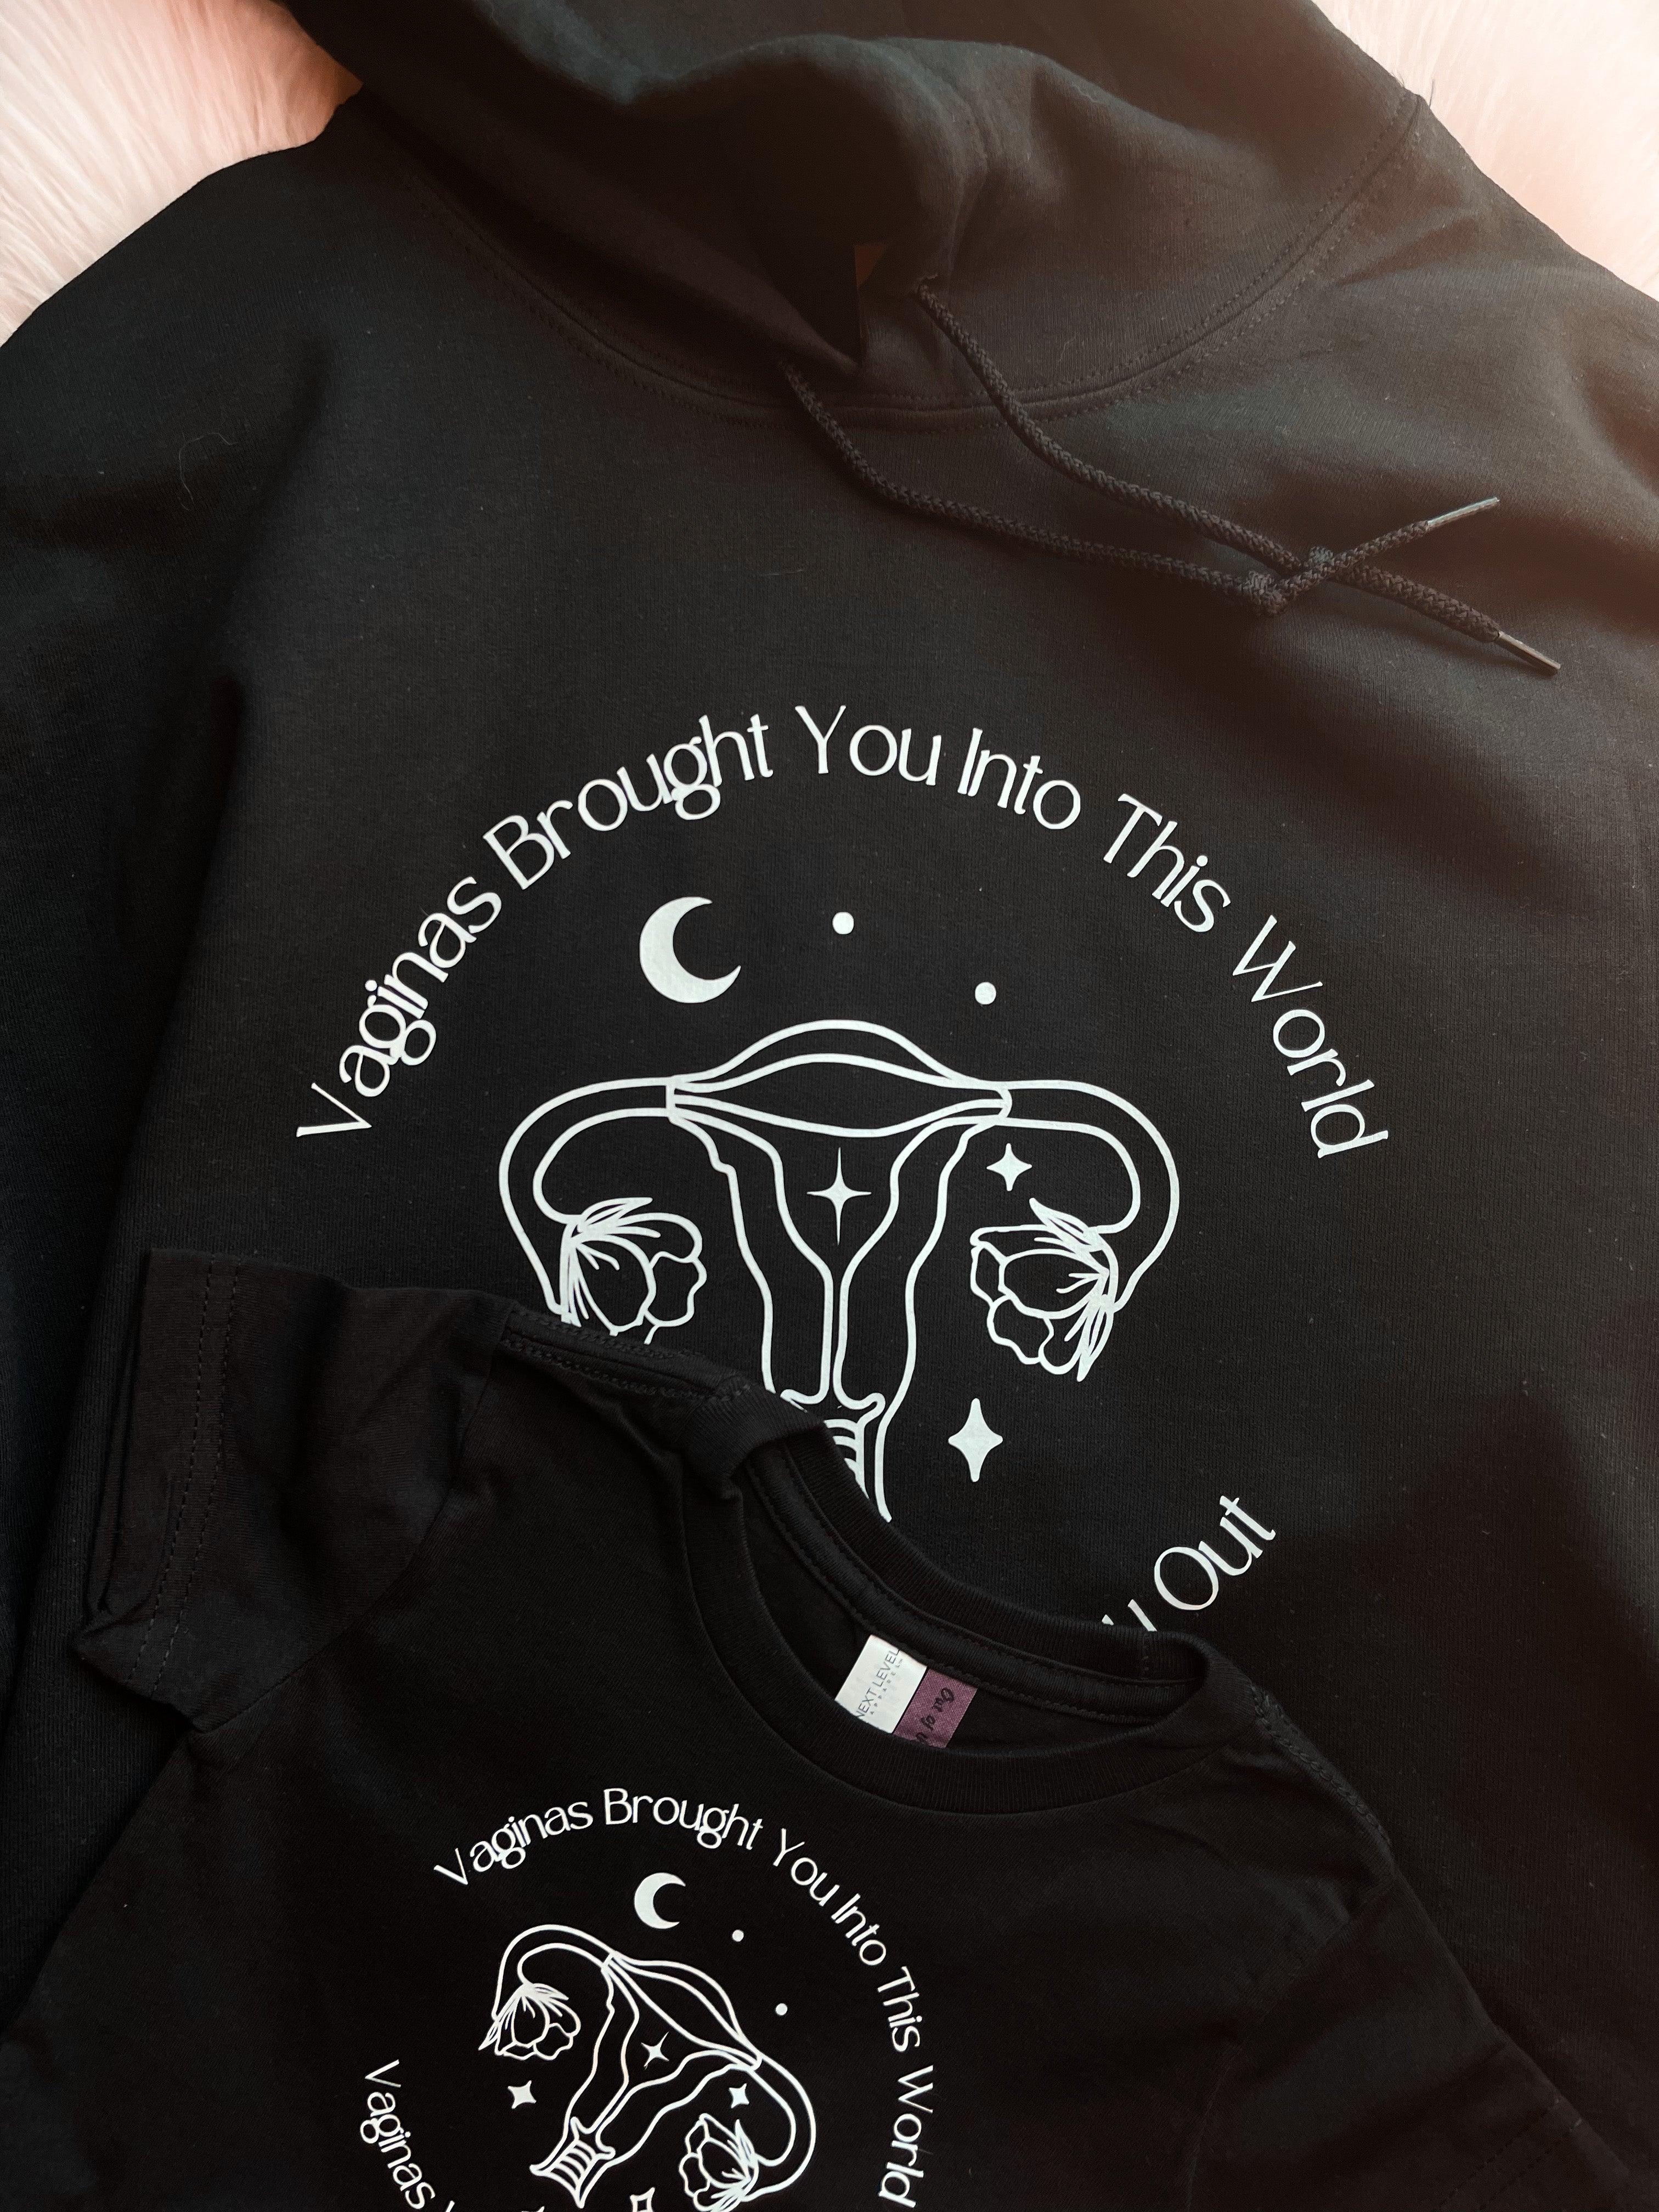 Vaginas Brought You Into This World Vaginas Will Vote You Out  (Tee)